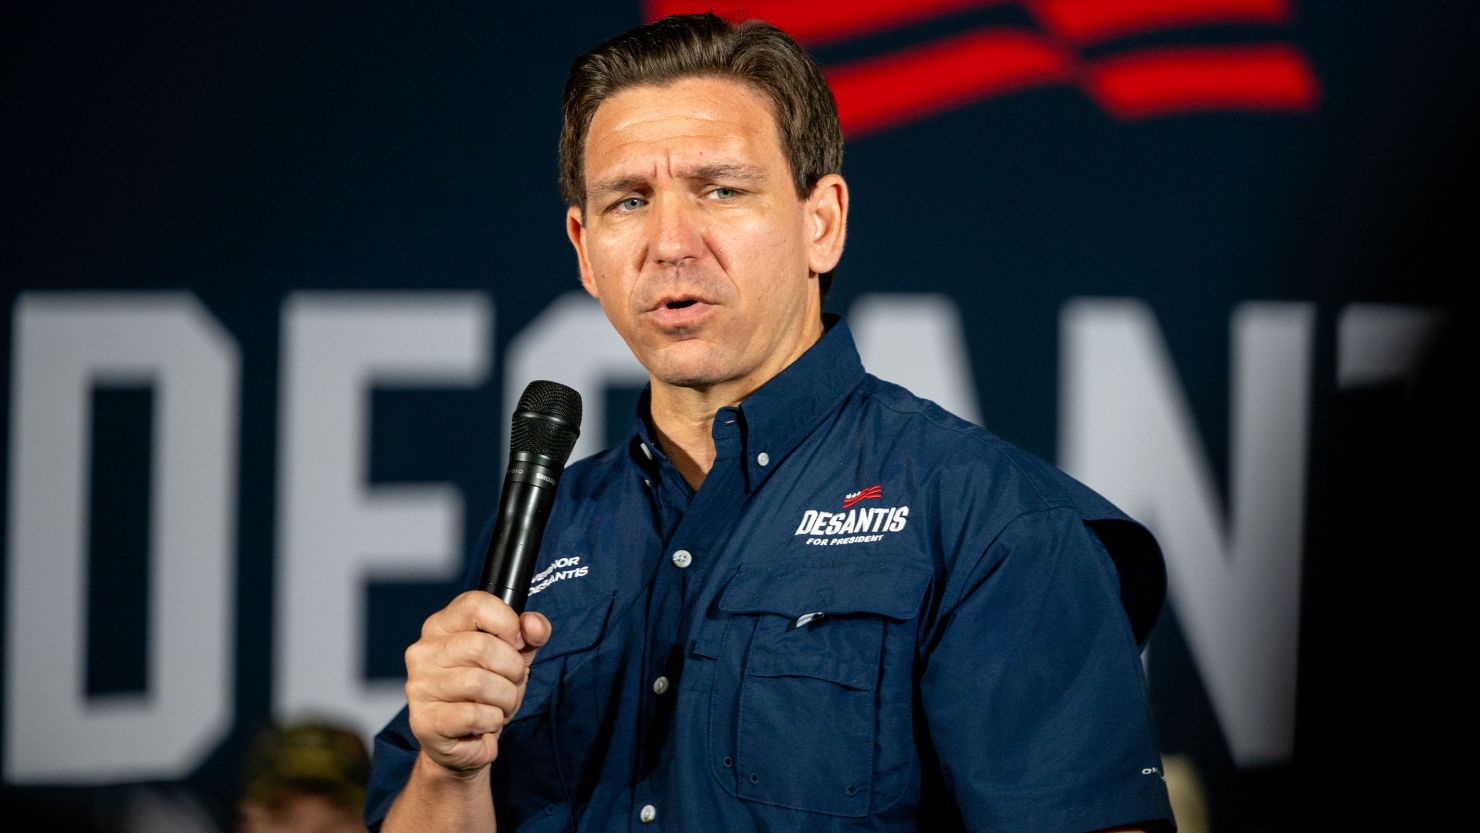 Republican presidential candidate and Florida Gov. Ron DeSantis speaks during a campaign rally on June 26, 2023 in Eagle Pass, Texas.